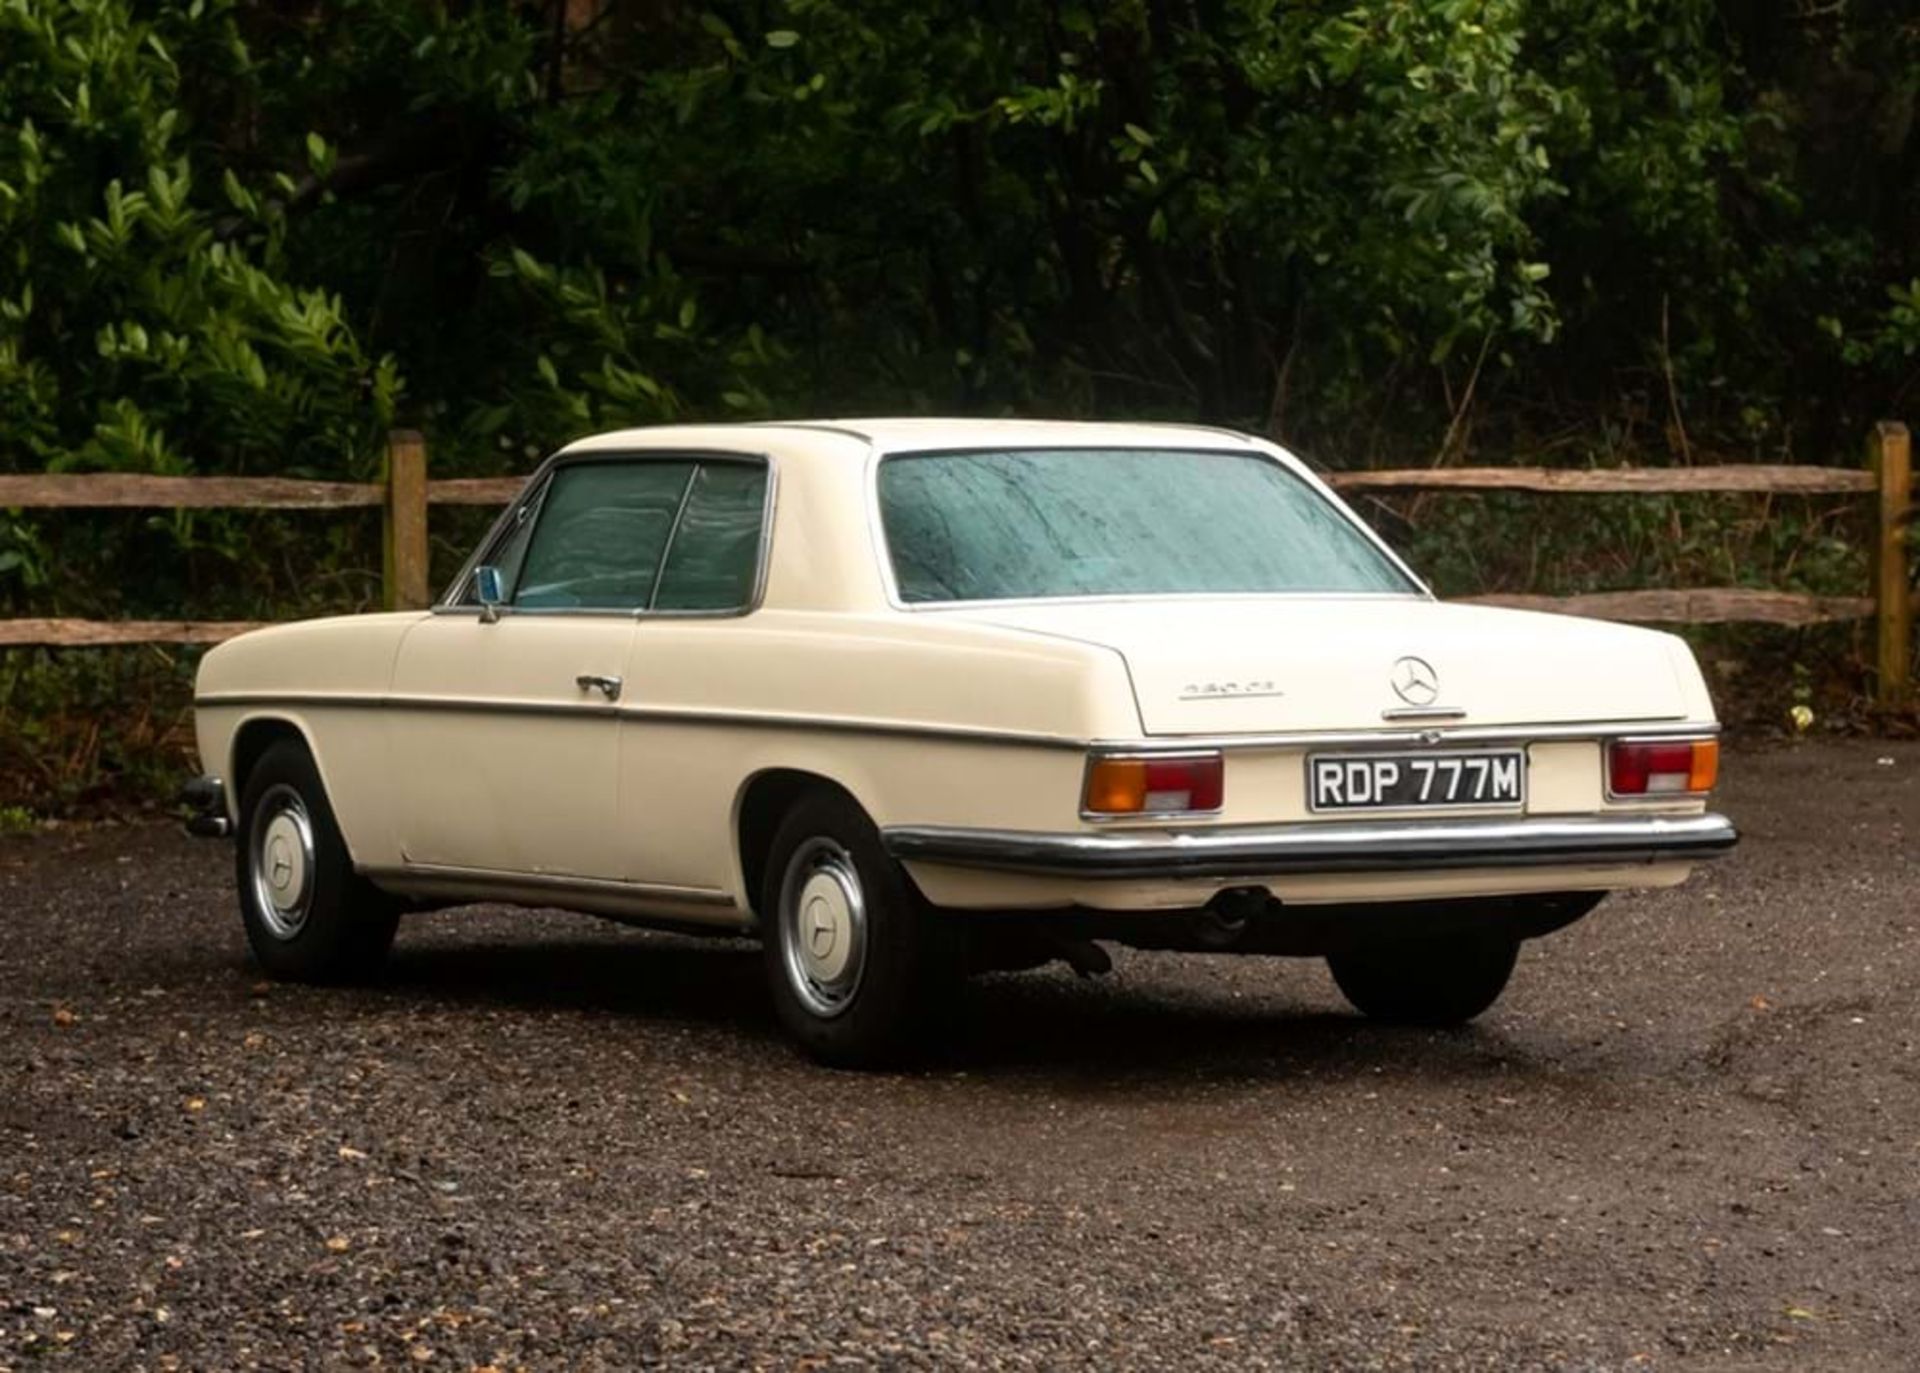 1973 Mercedes-Benz 280CE €œFrom the Cheesbrough collection€ - Image 6 of 7